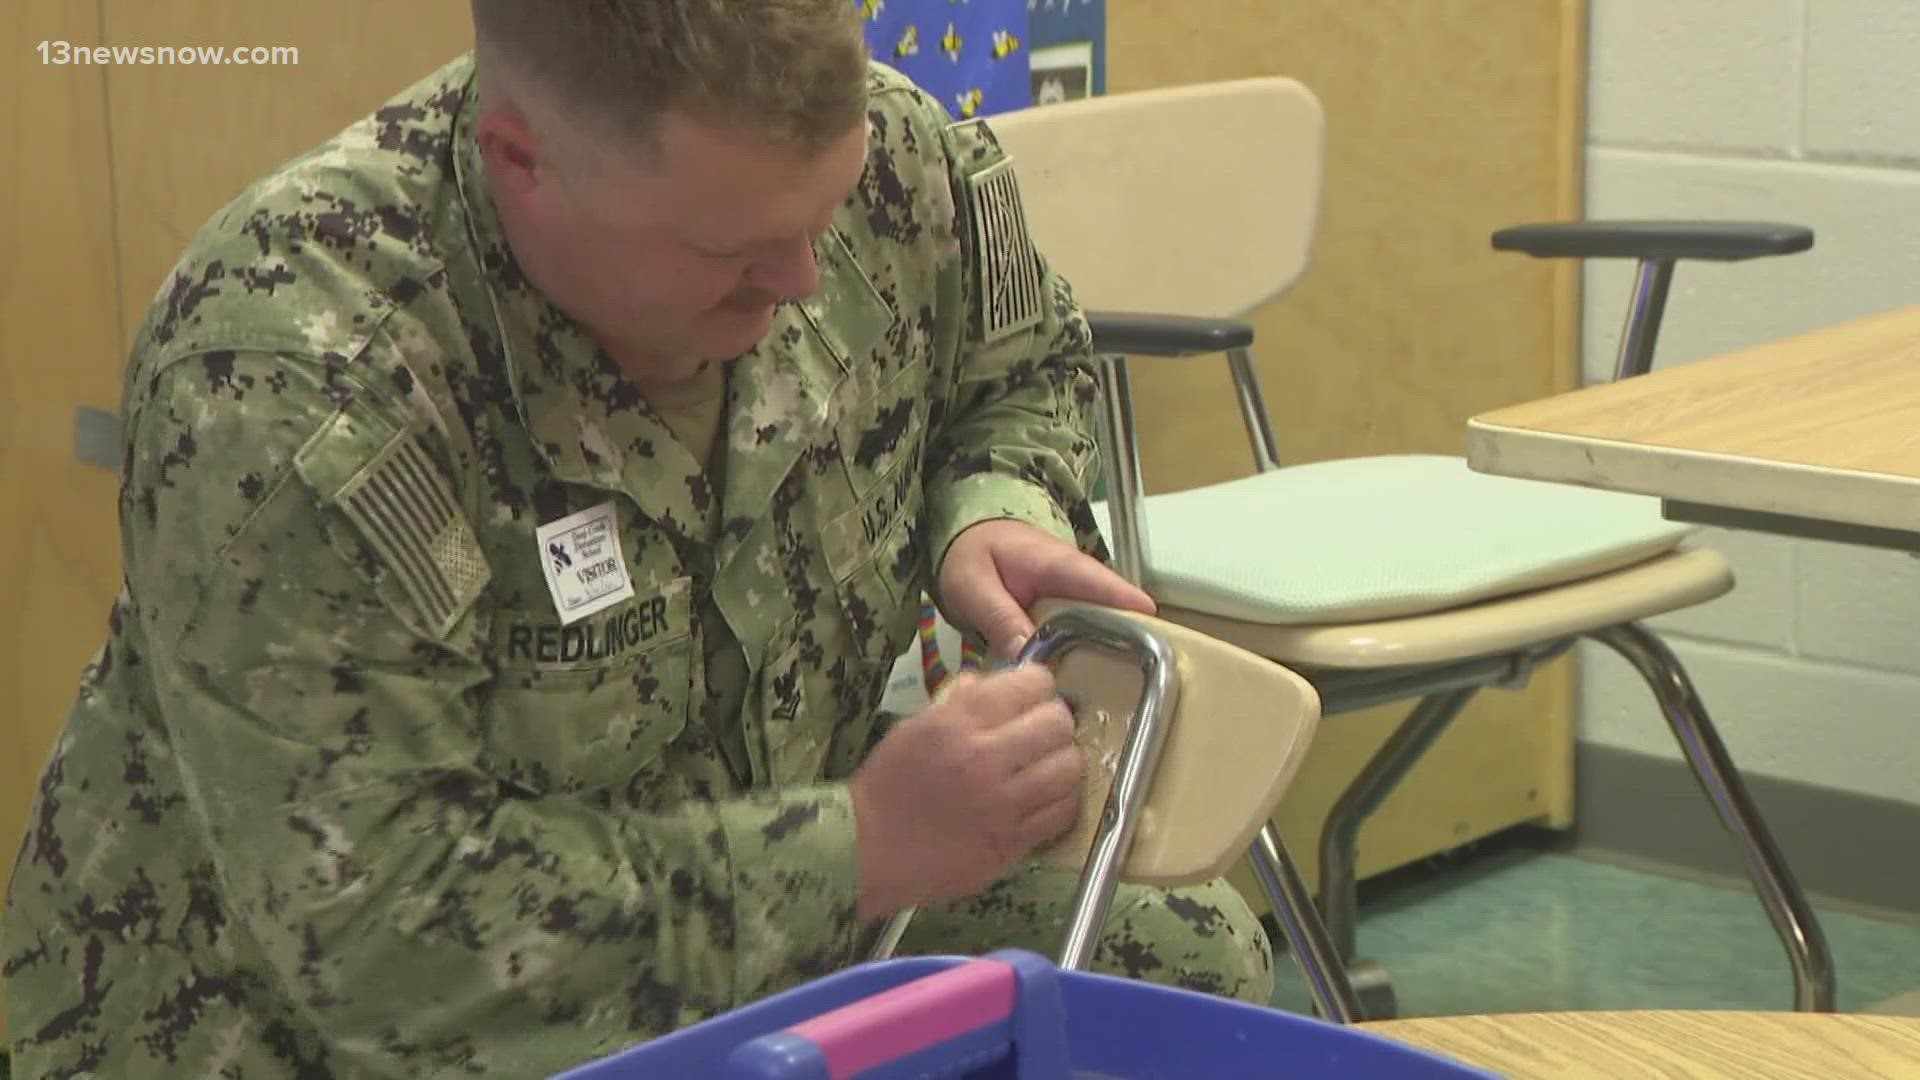 Teachers got some help making sure their classrooms are ready. Navy sailors came to schools and helped teachers with heavy lifting.